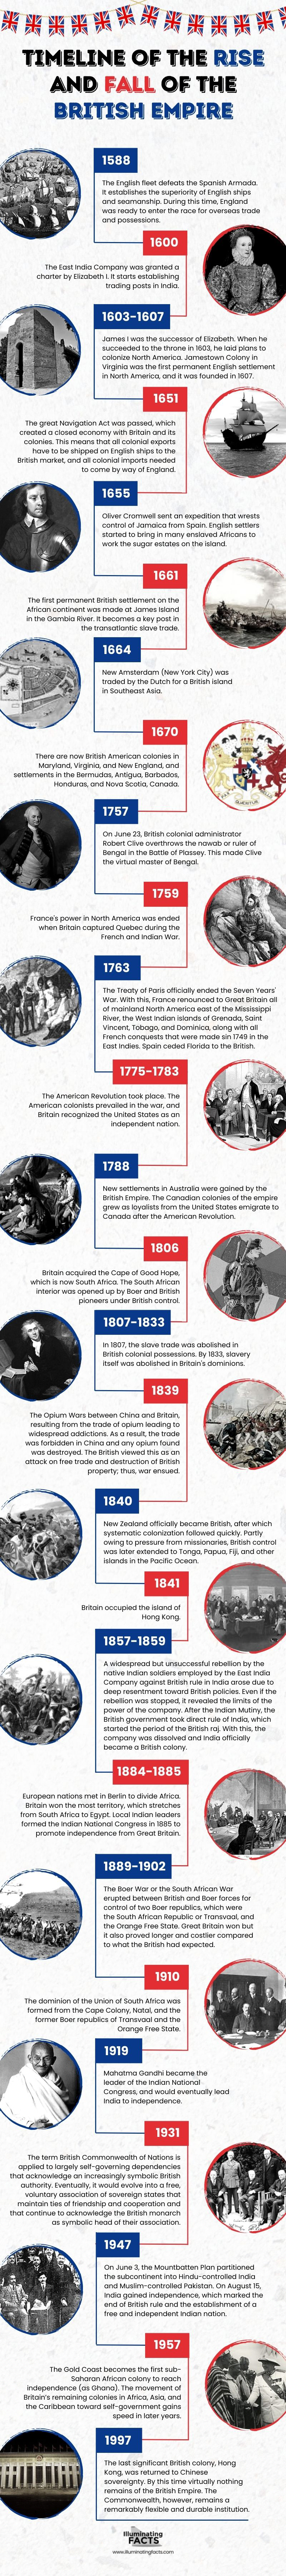 Timeline of the Rise and Fall of the British Empire